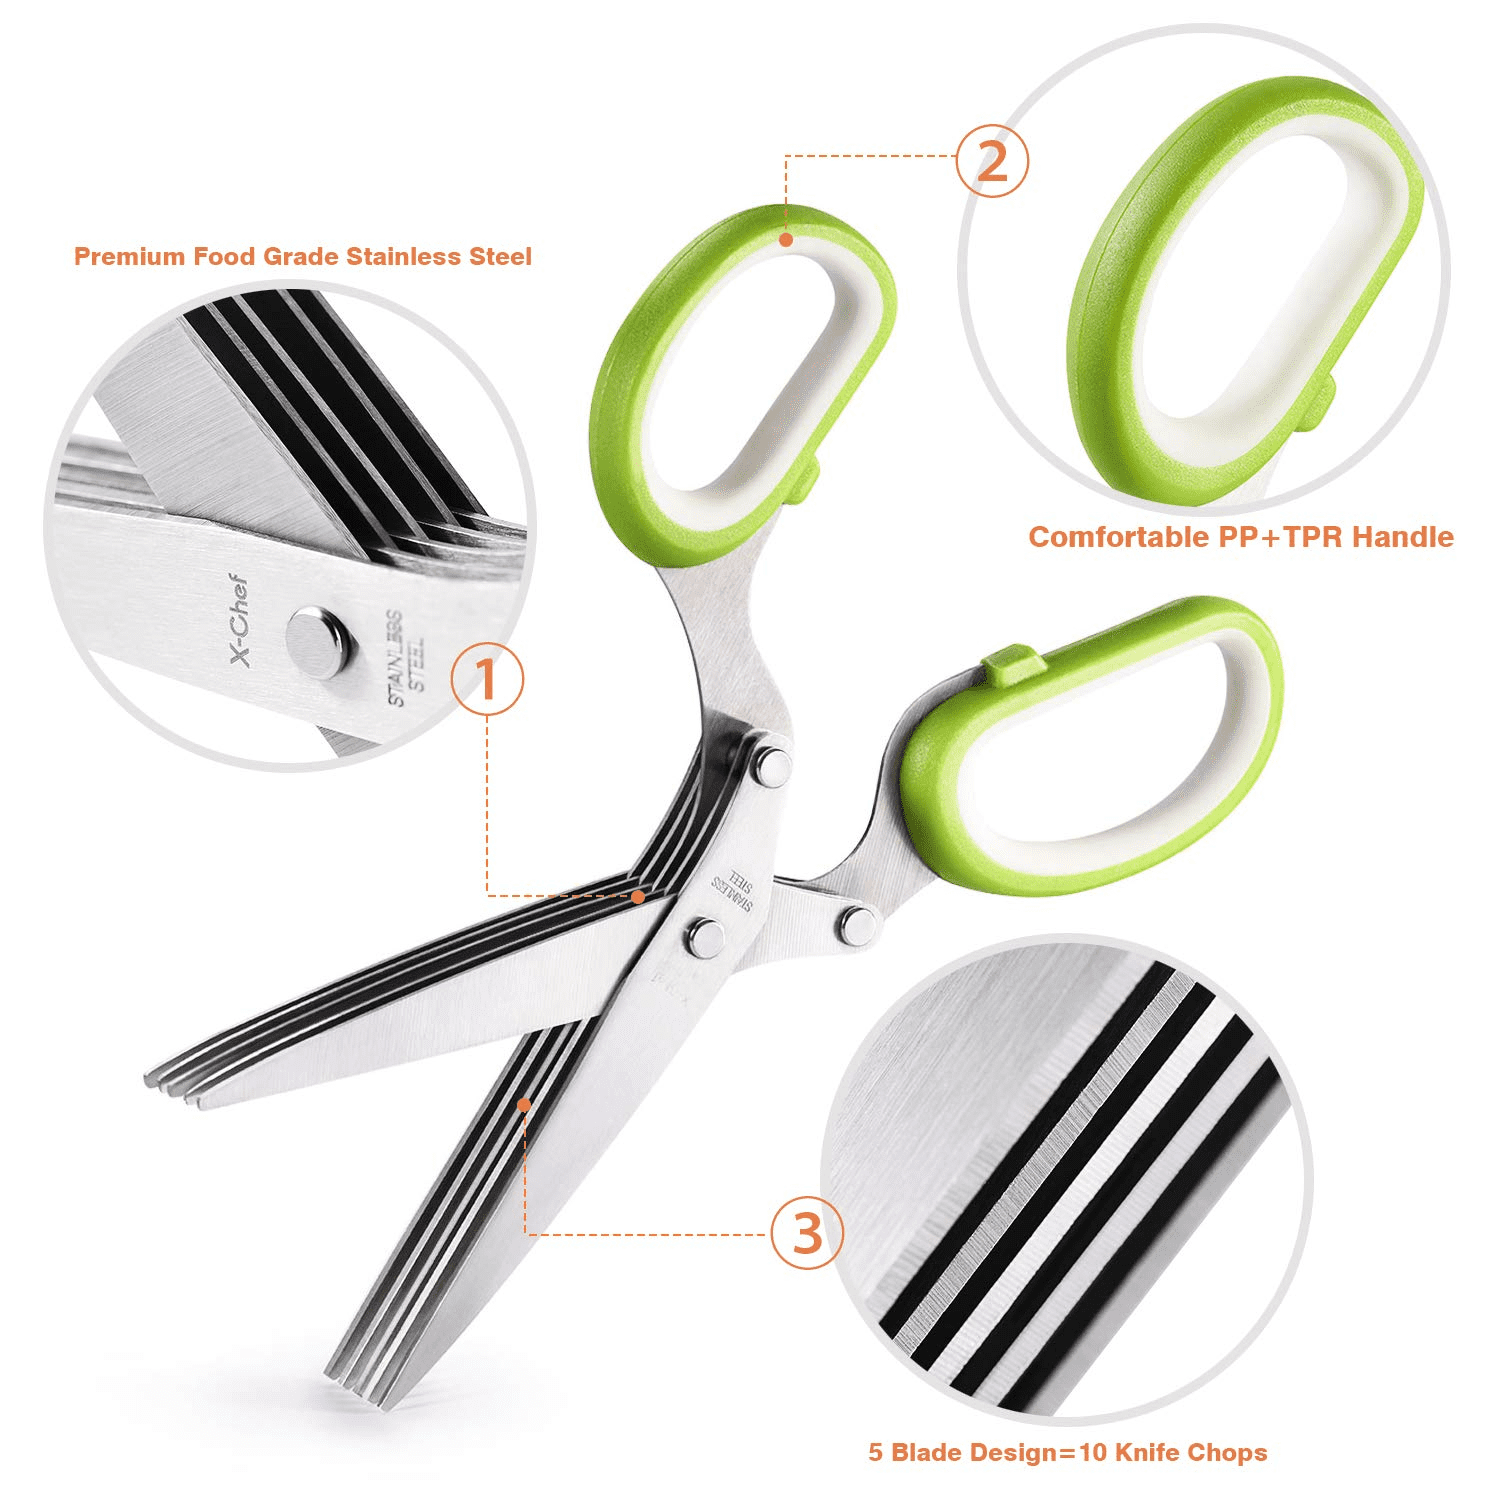 LUVCOSY 3 Packs Herb Scissors Set - 5 Blades Herb Scissors with Herb  Stripper, 2 Packs Herb Stripper Tools with Safe Cover, Cool Kitchen Gadgets  for